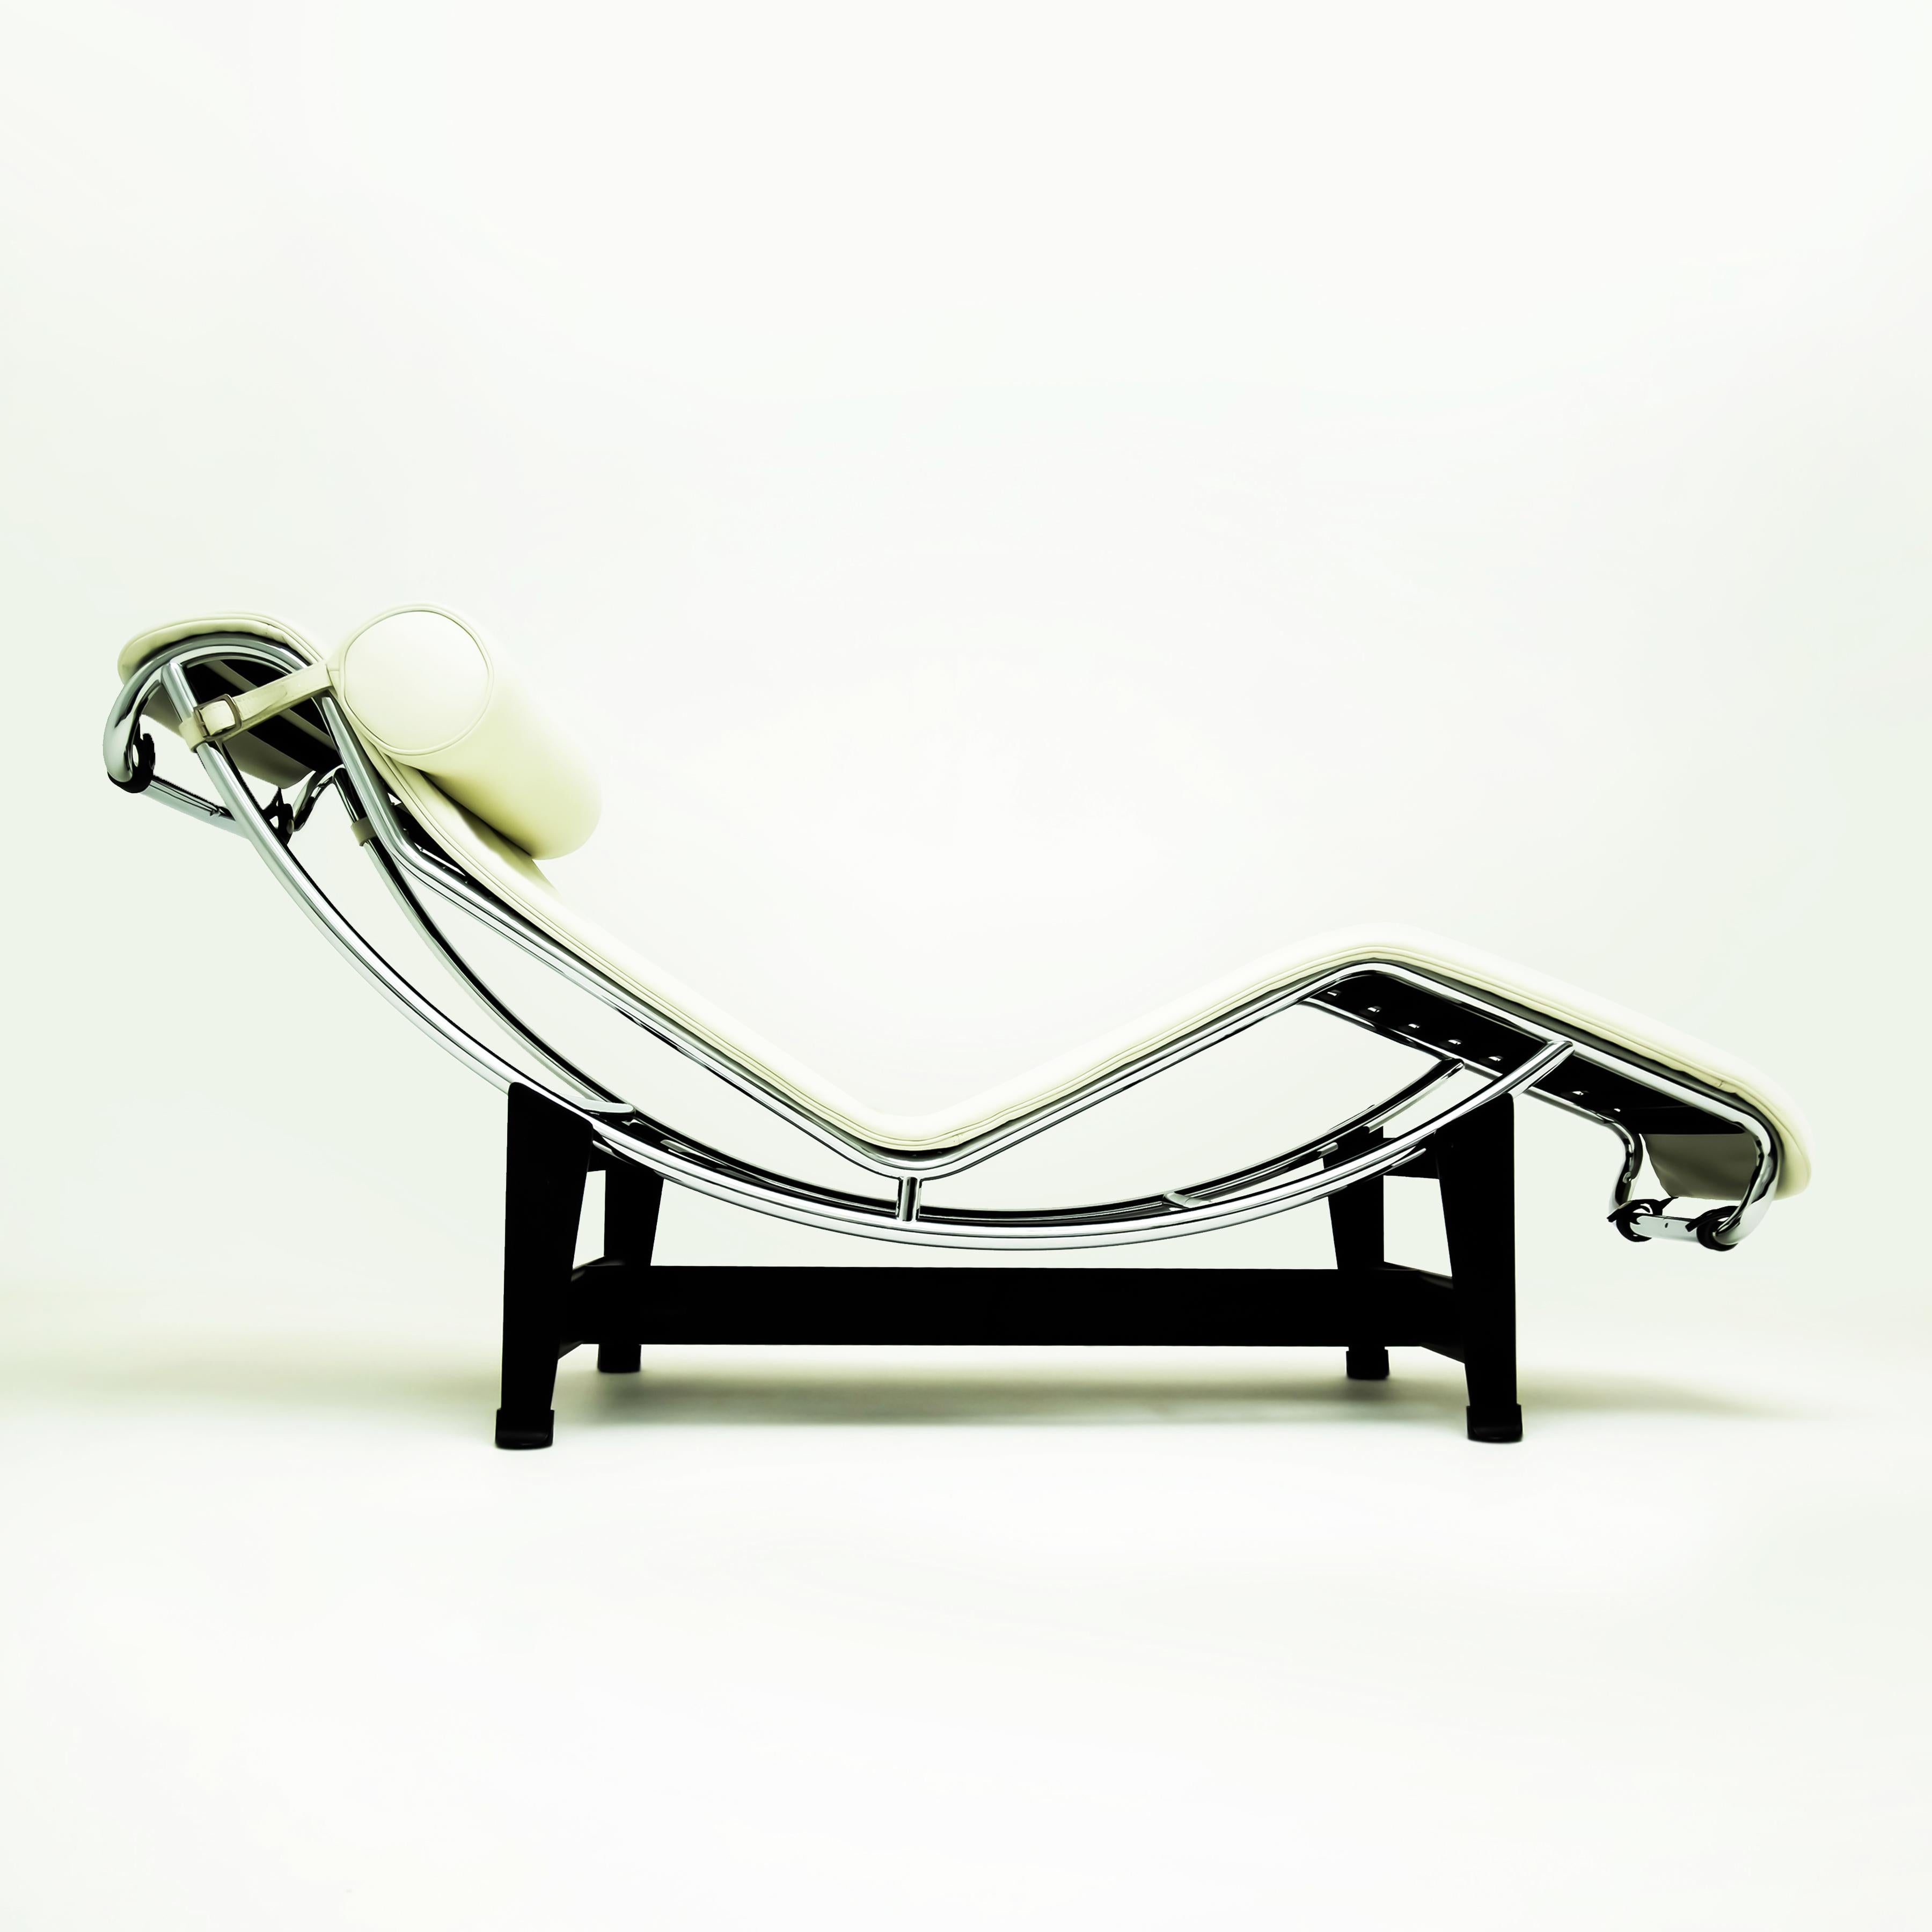 An original vintage LC4 Chaise Longue manufactured by Cassina using a tubular chrome frame and black metal base with cream leather upholstery and headrest. 
 
The LC4 Chaise Longue is undoubtedly one of the most iconic examples of 20th century